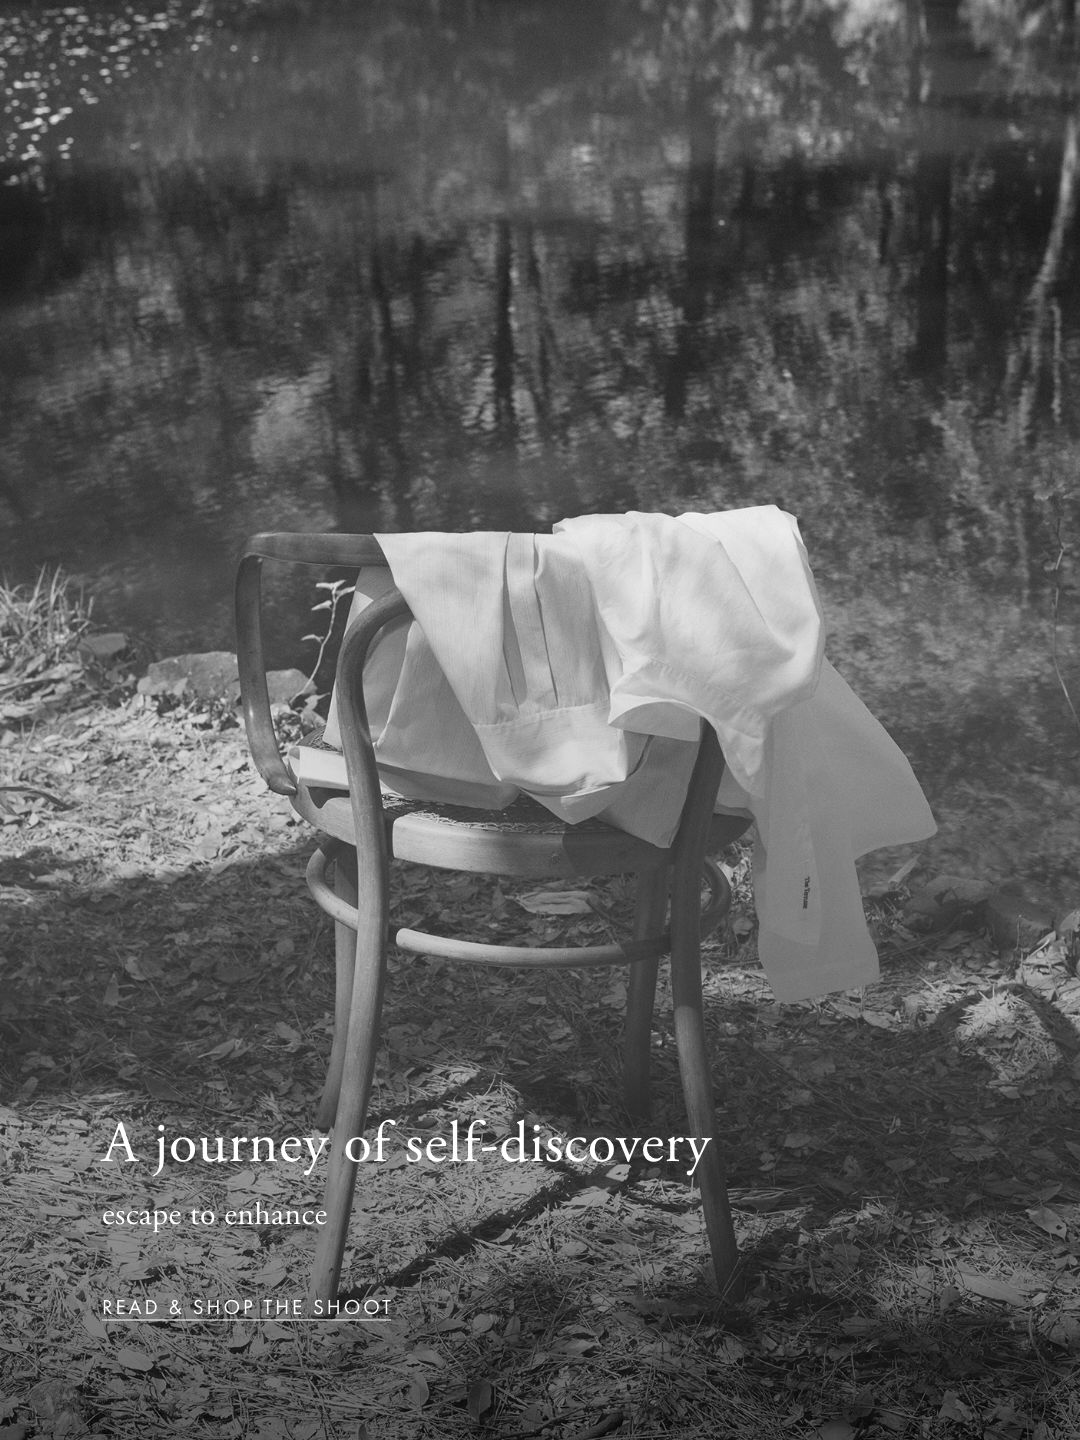 A journey of self-discovery